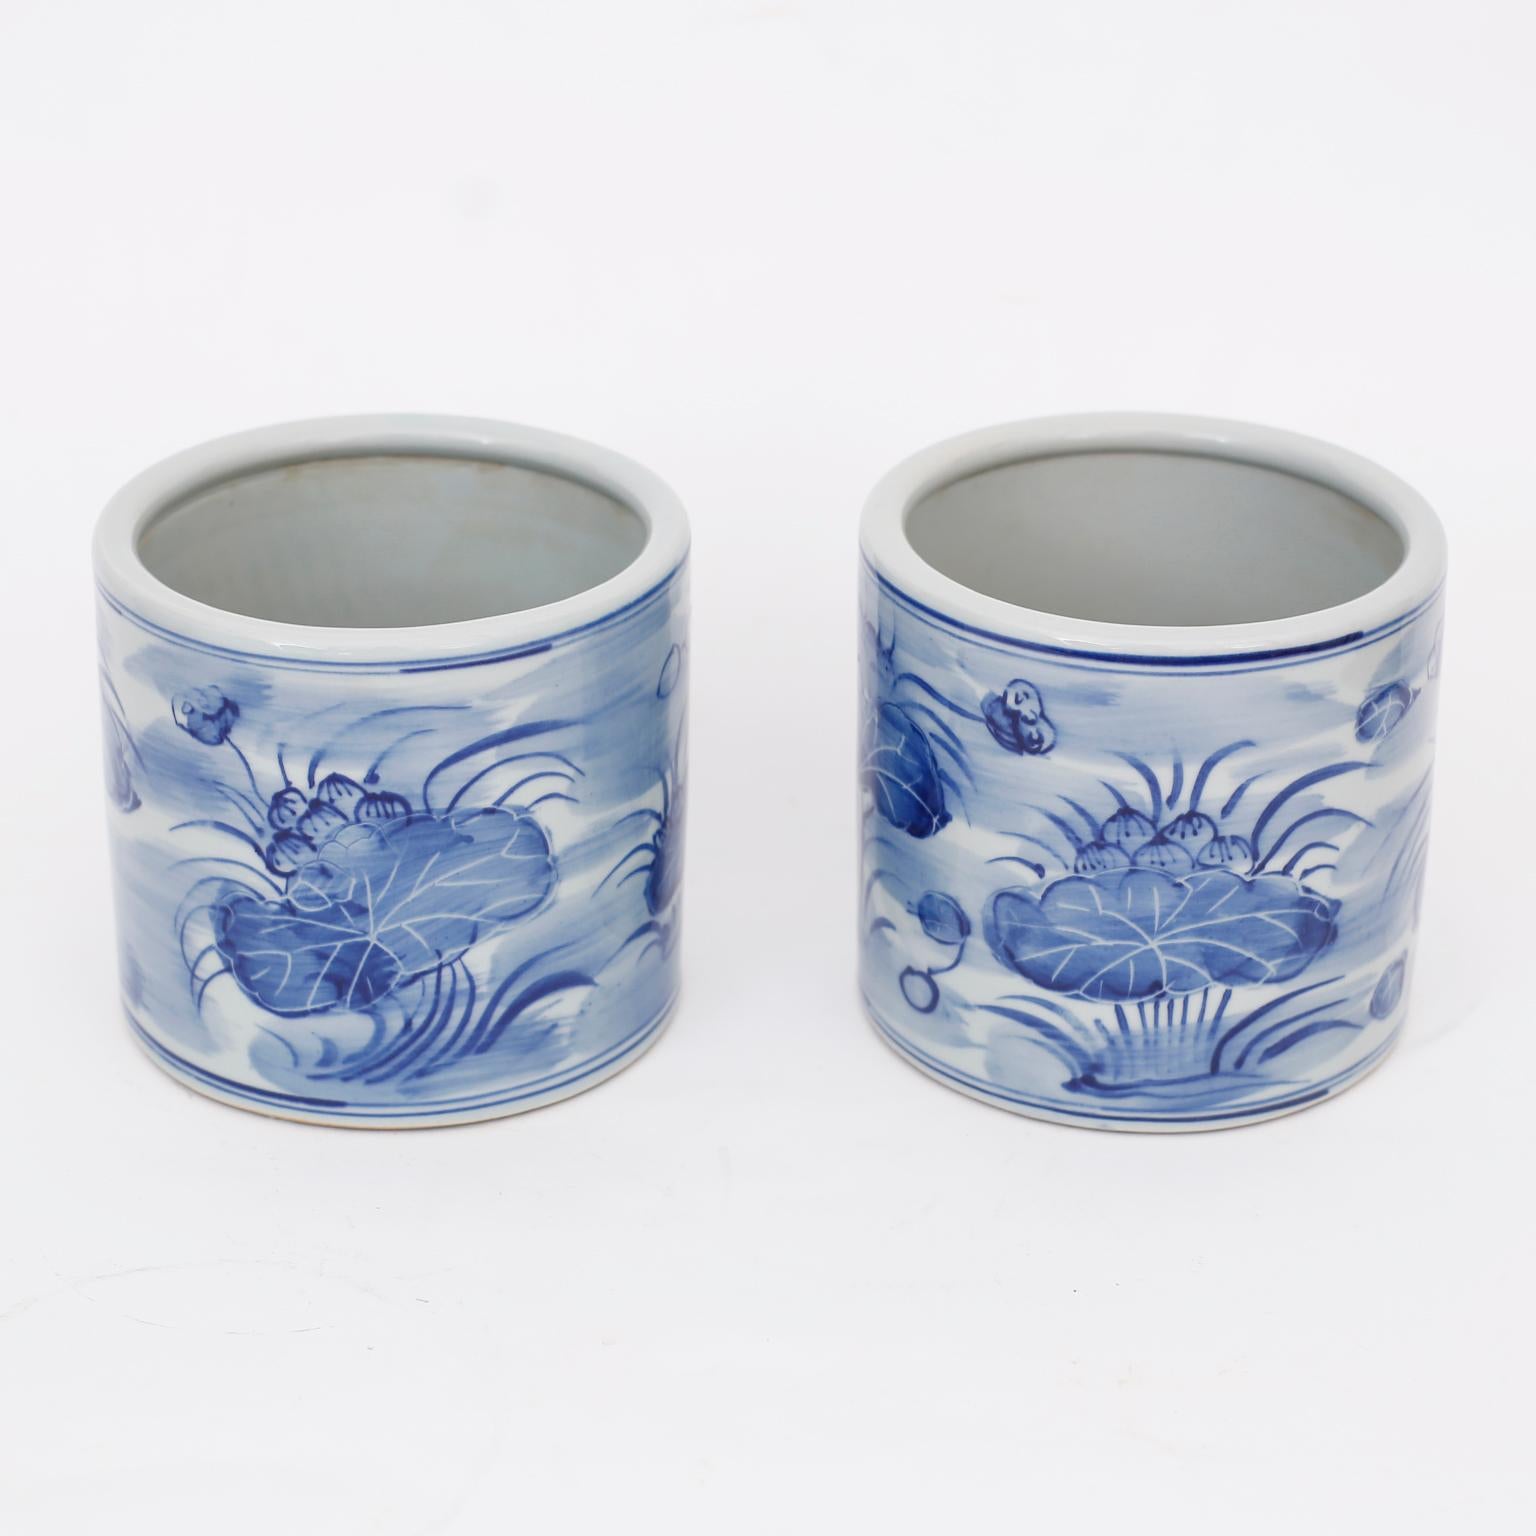 Pair of Chinese blue and white porcelain pots, in the Chinese export style, hand decorated with a bold water lily motif.